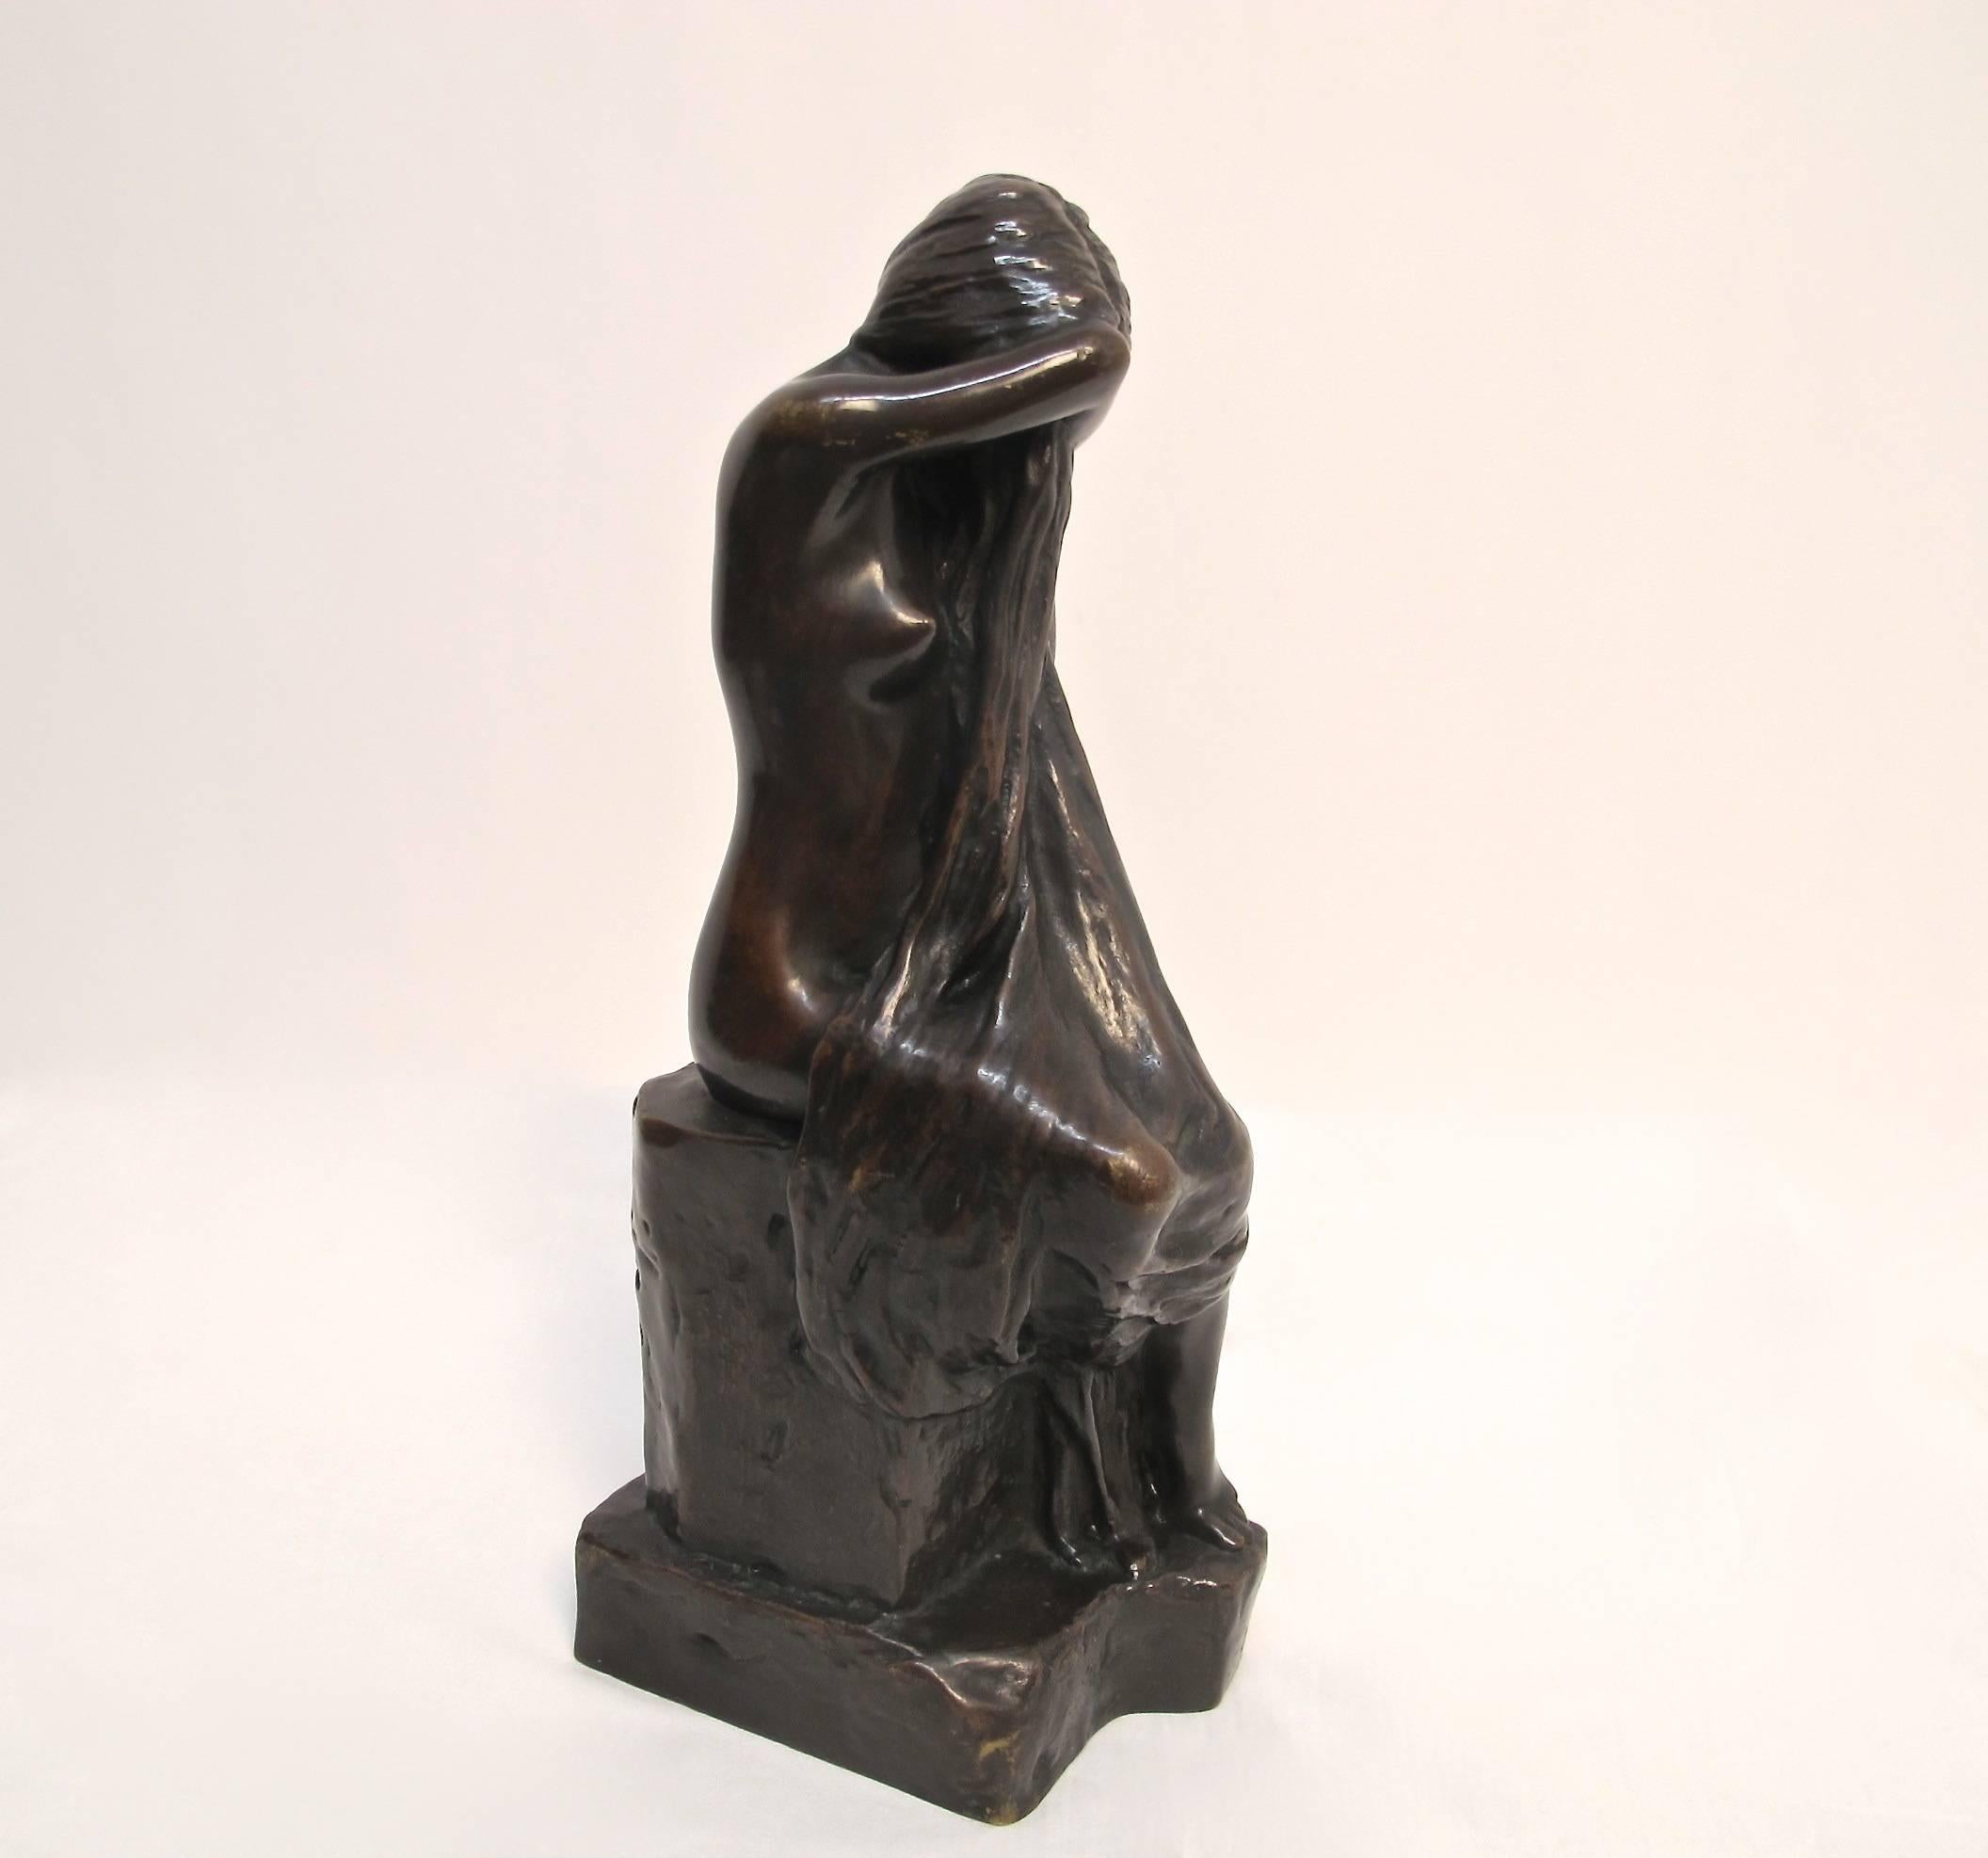 Albert Bartholomew (b.1848-d.1928) bronze of a nude maiden covering her face, figure is known as La Pleureuse (The Mourner). Signed and foundry mark on lower base, late 19th century.
Albert Bartholomew was active/lived in France and is known for